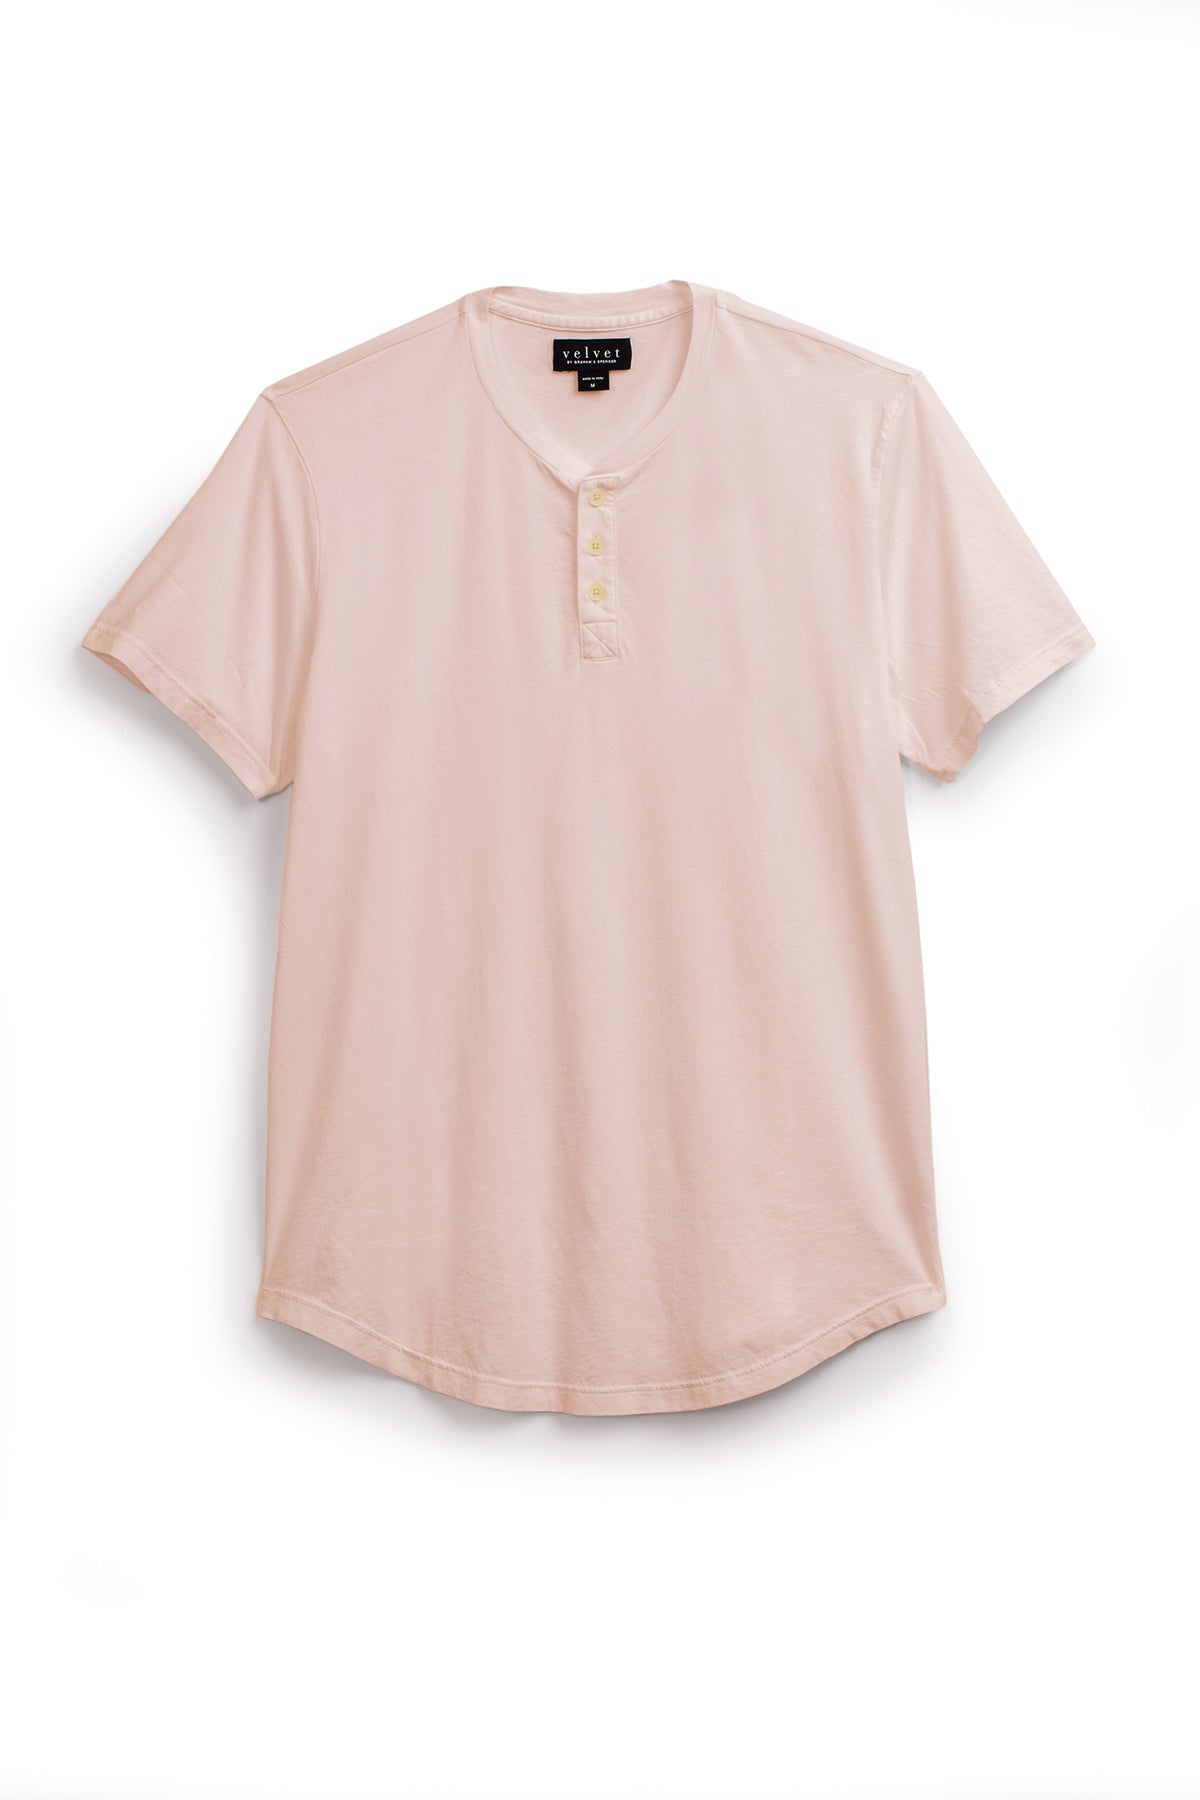 Fulton Short Sleeve Henley in light pink color bloom with white pants flat lay view-35567477326017